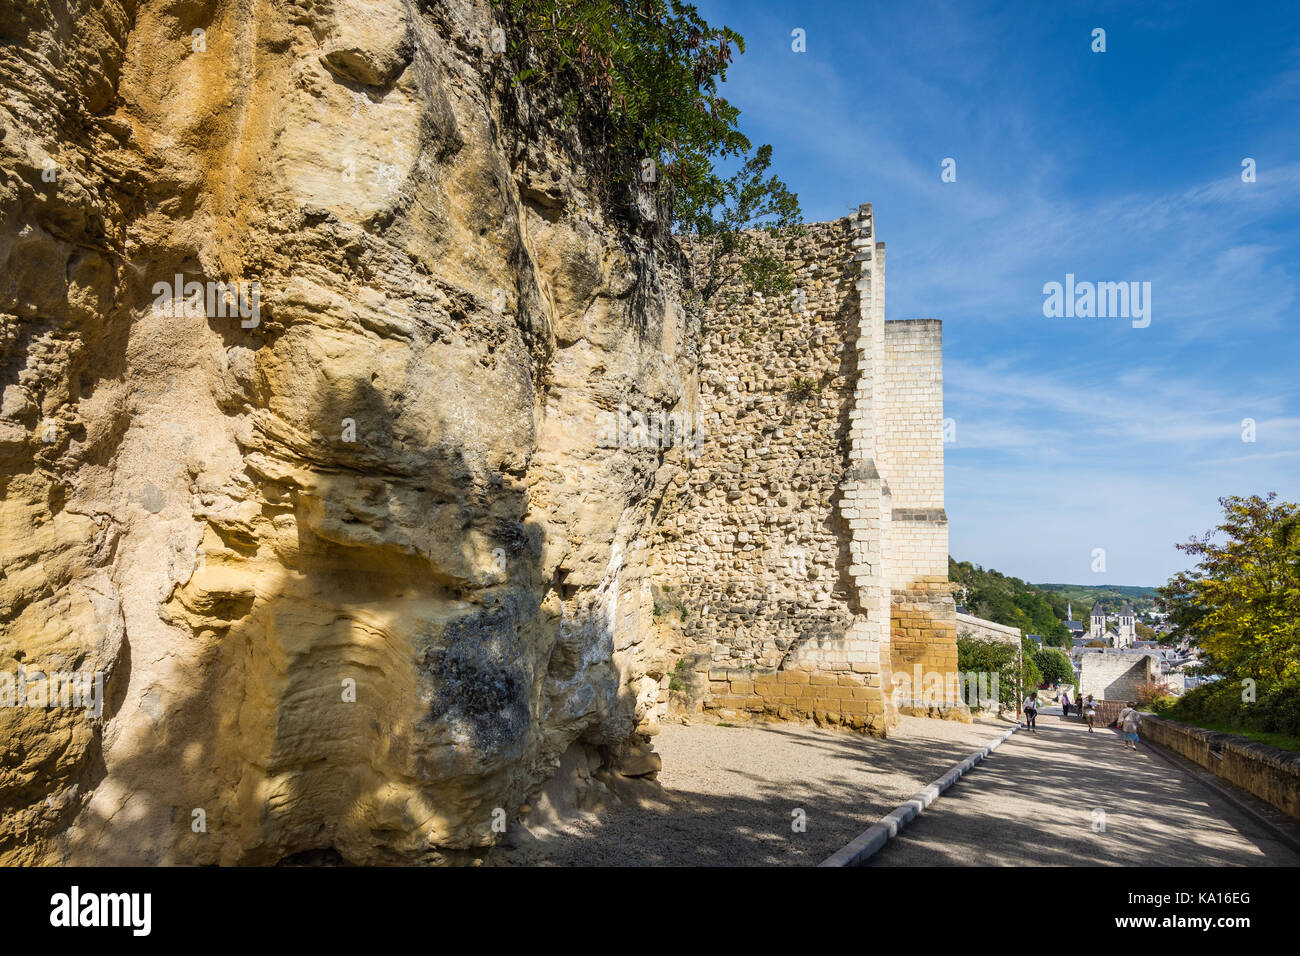 Details of rock face and chateau's stone walls - France. Stock Photo